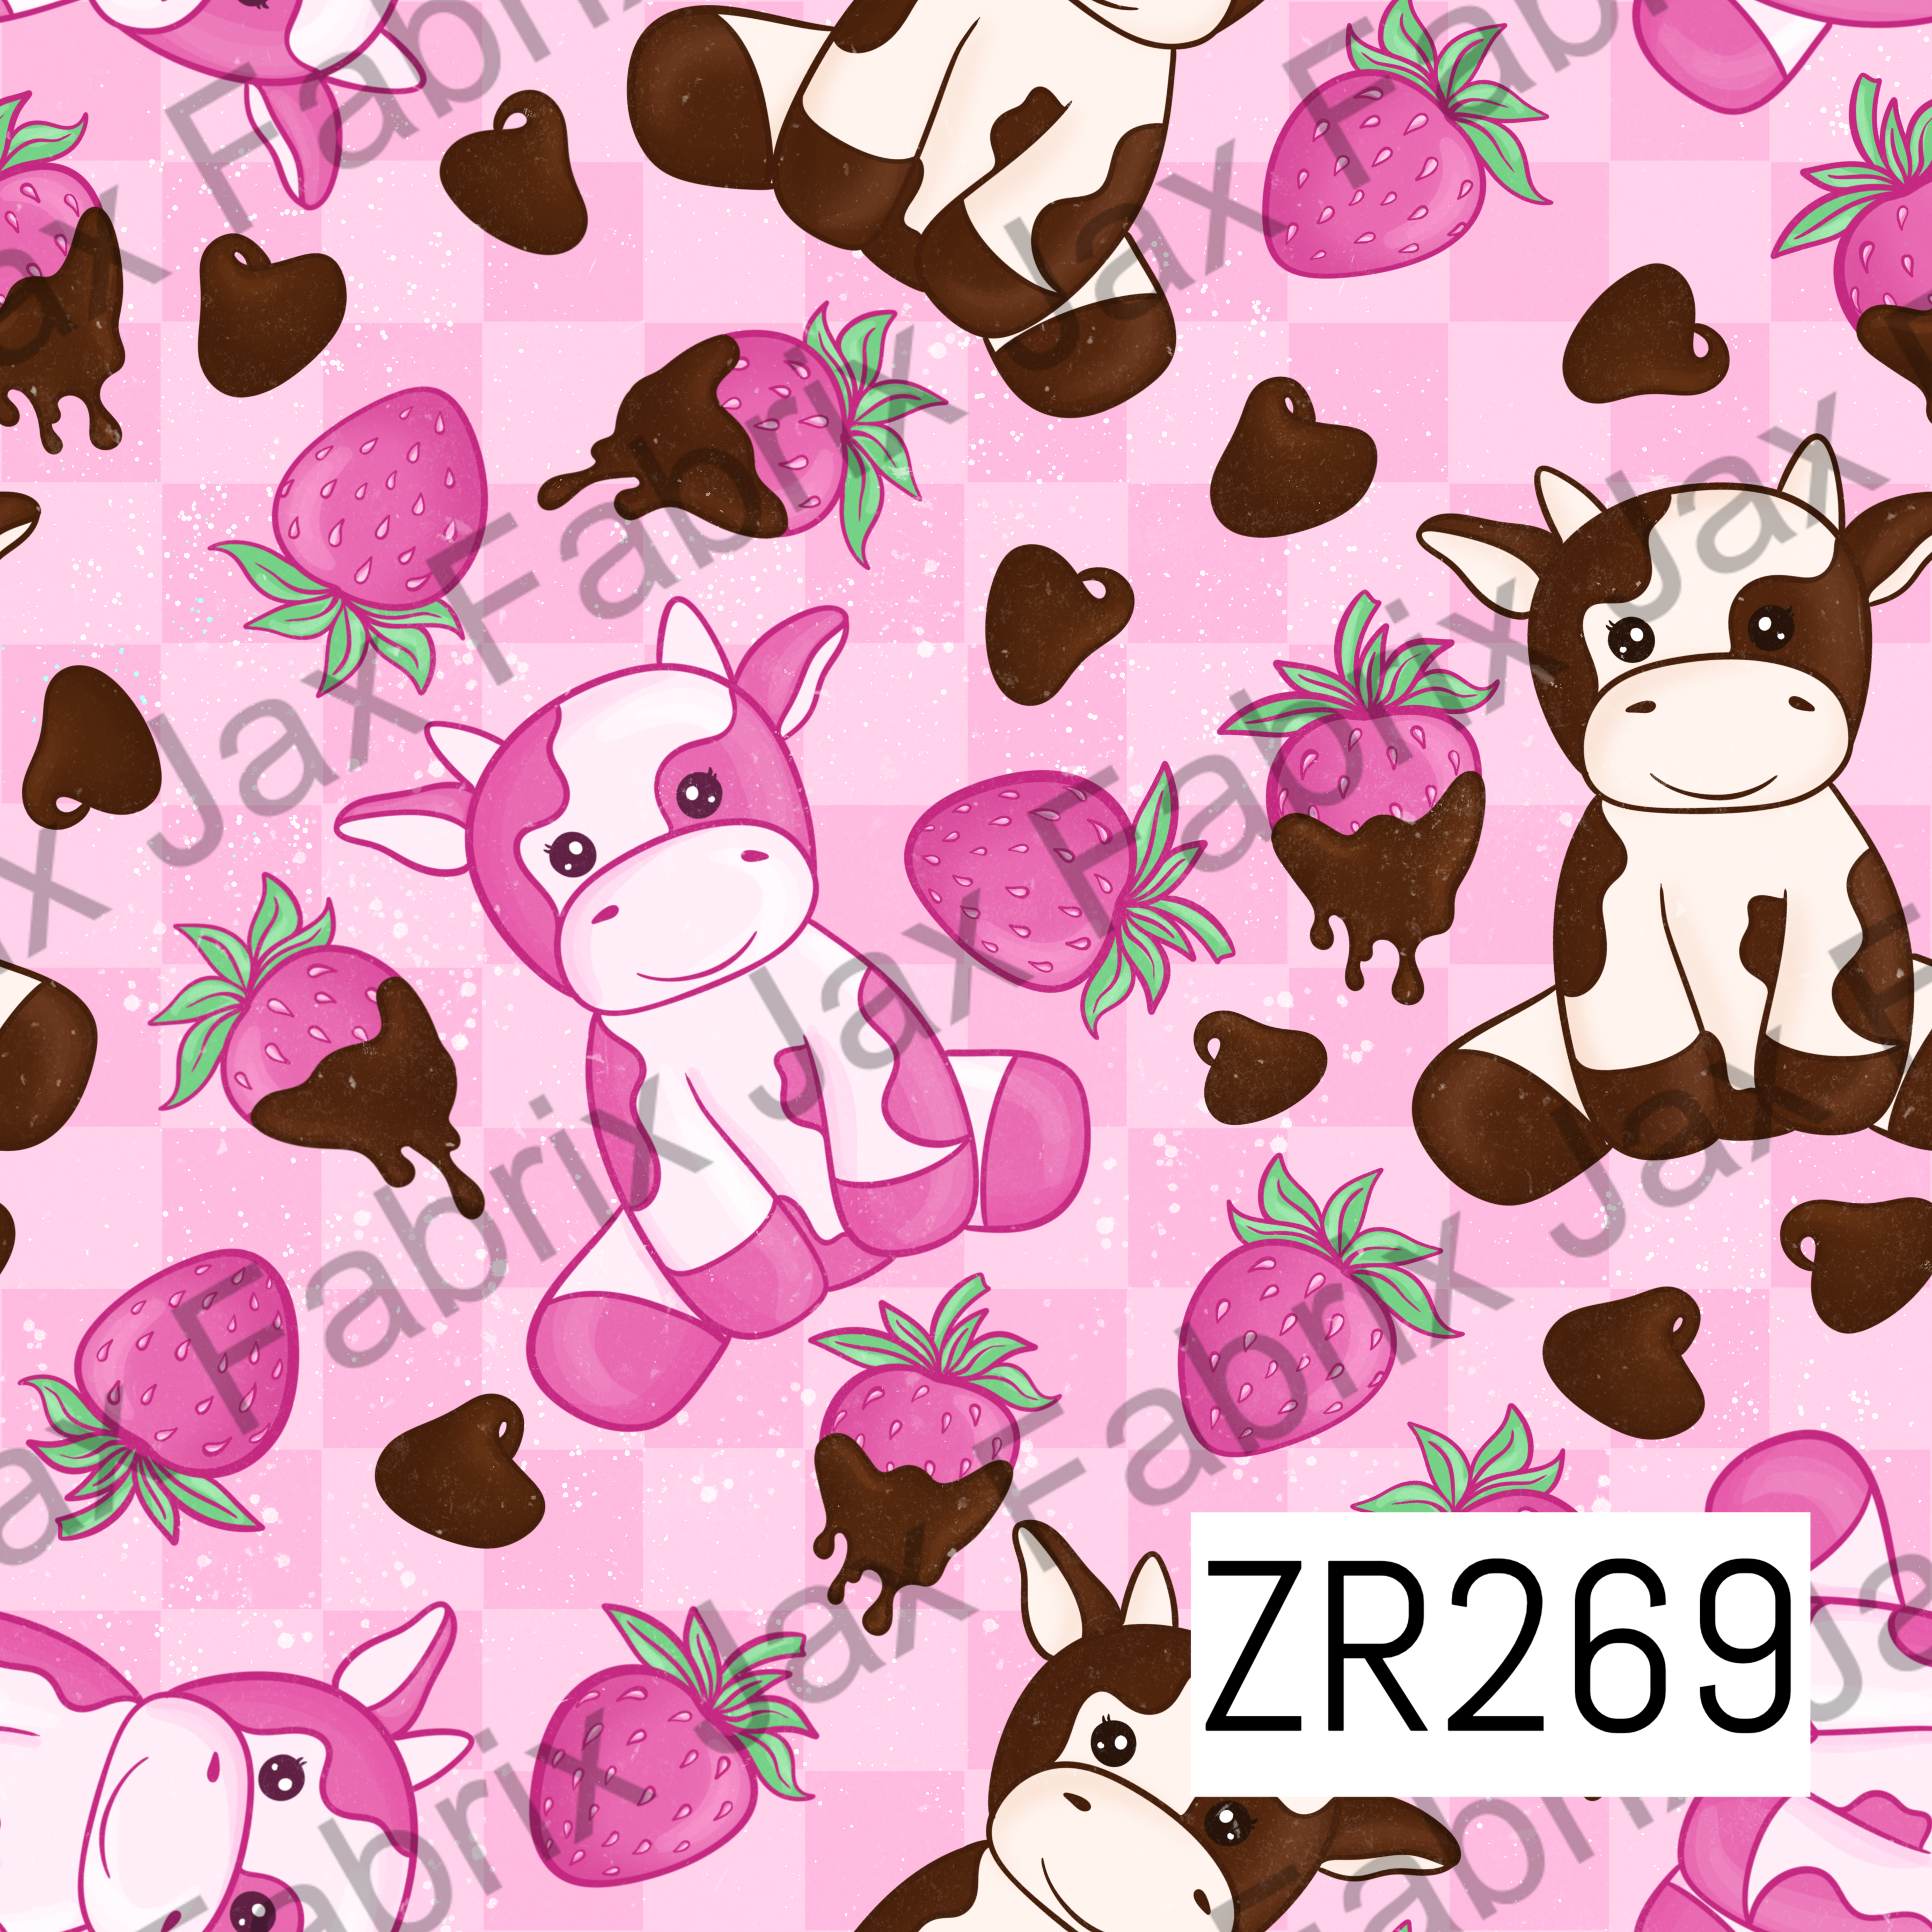 Cute Strawberry Cow Print Kawaii Aesthetic Pattern Poster